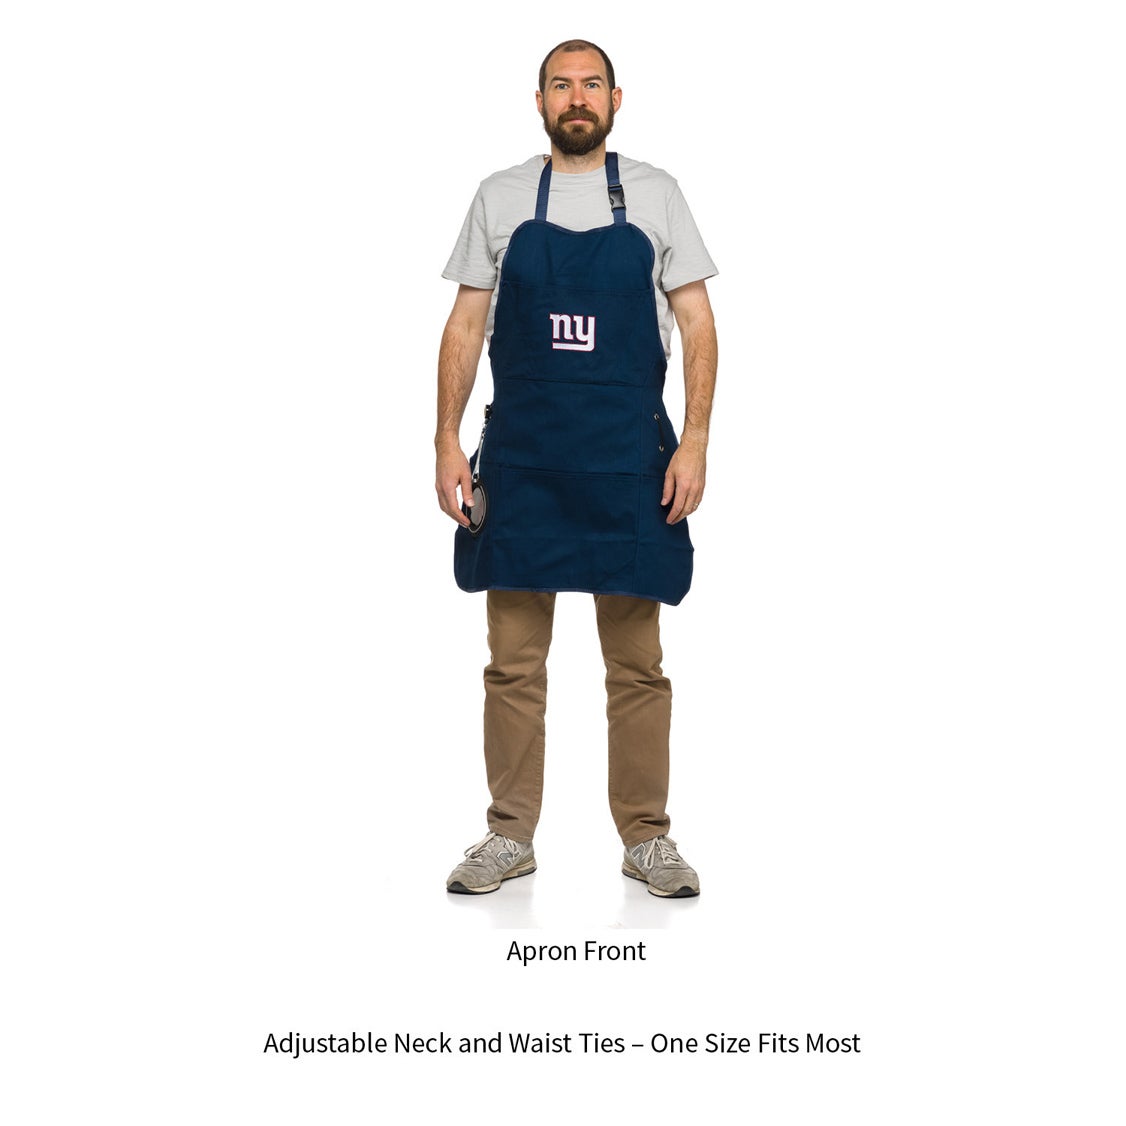 New York Giants Grilling Apron